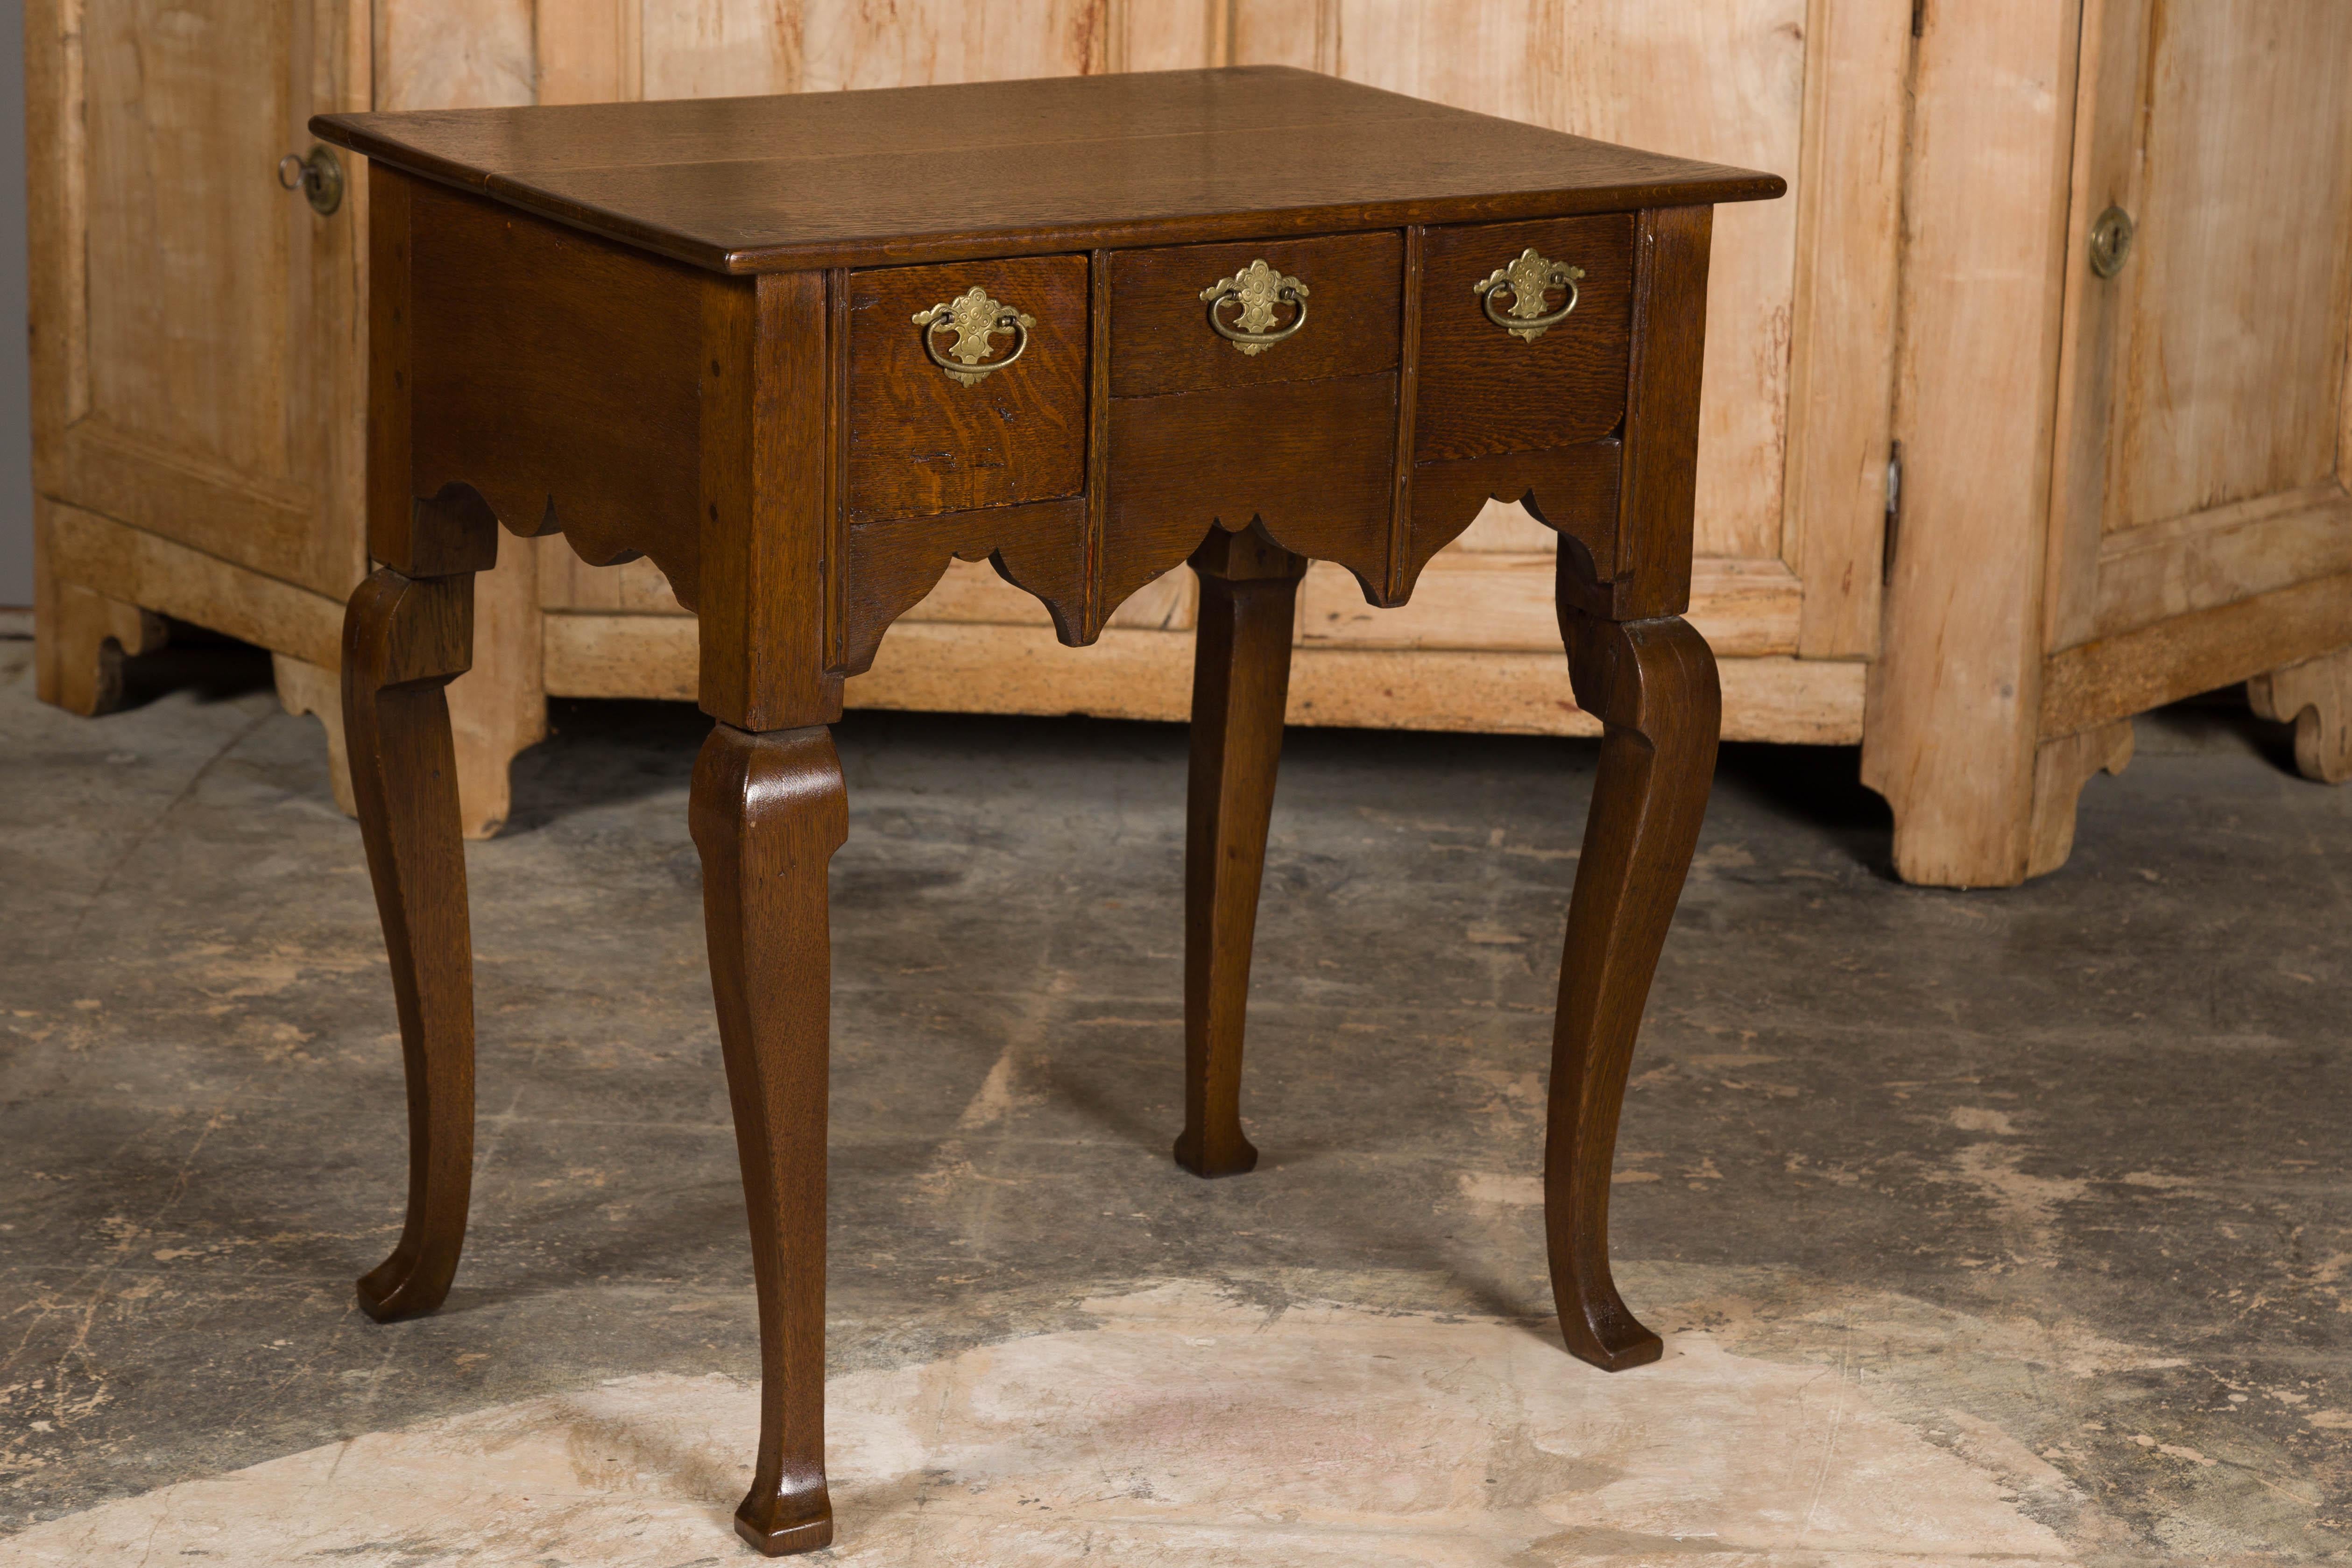 English Georgian 19th Century Oak Table with Three Drawers and Cabriole Legs For Sale 11